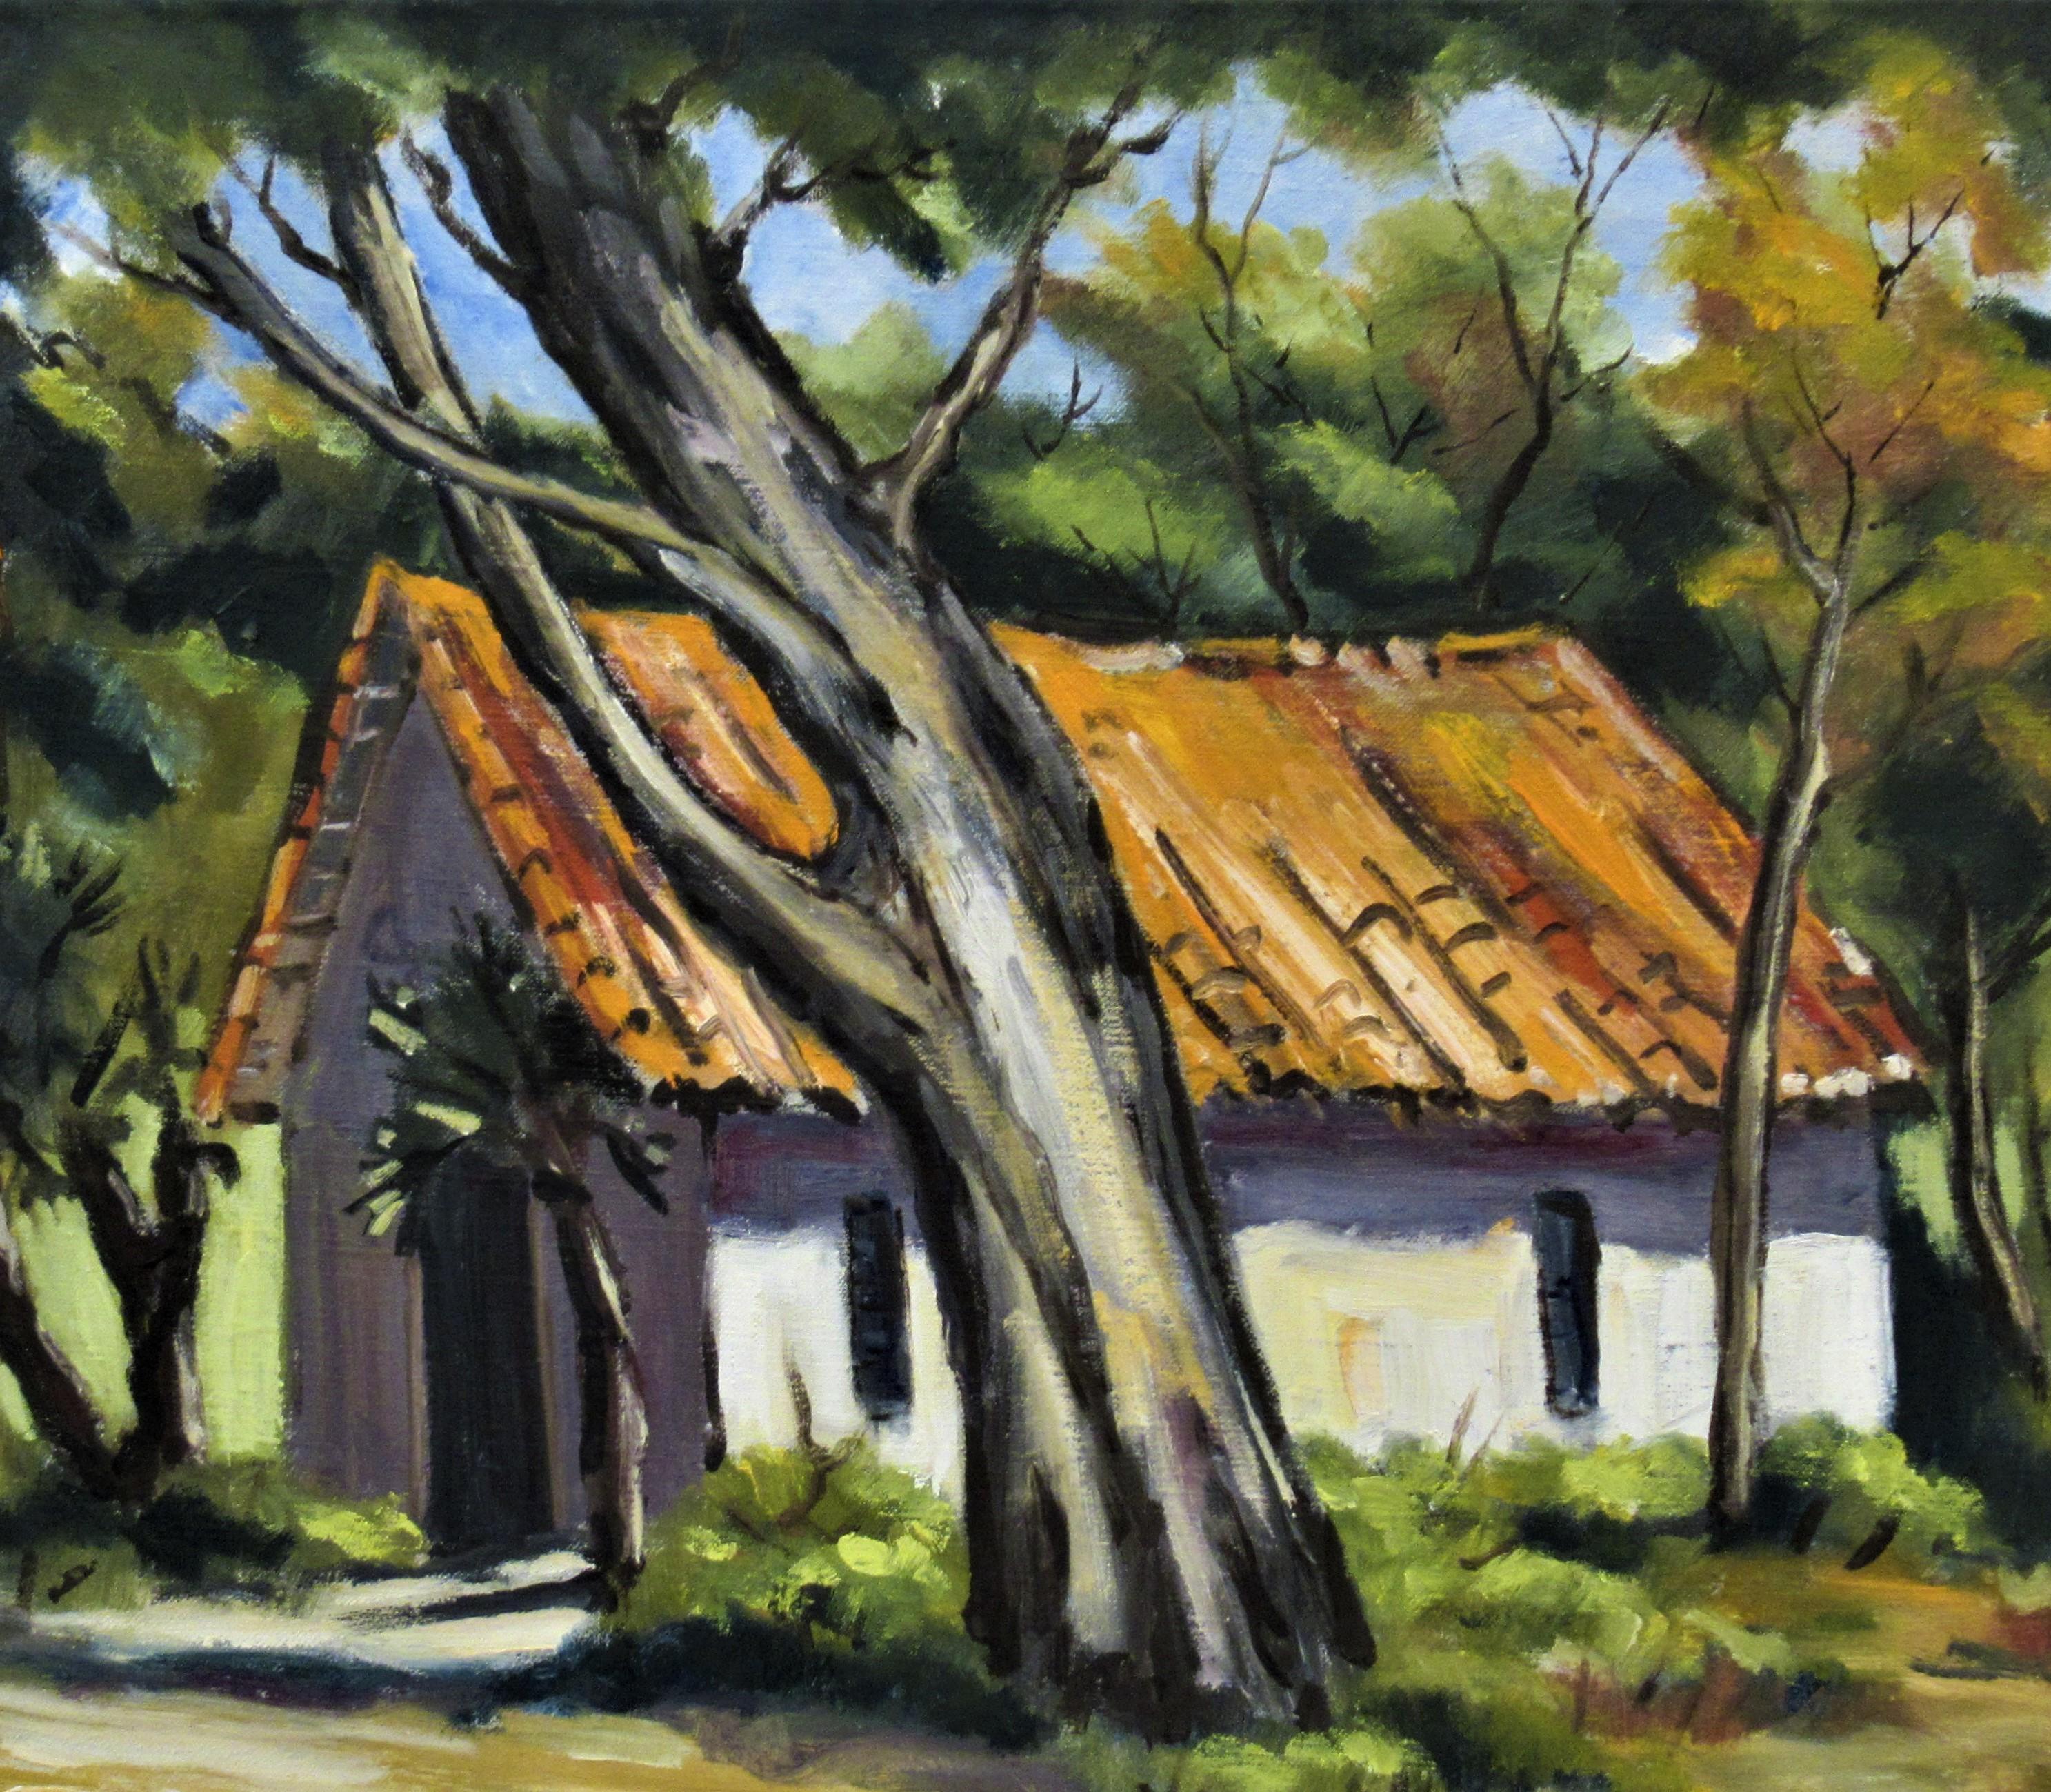 Nile Adobe House - Painting by Clifford Holmes